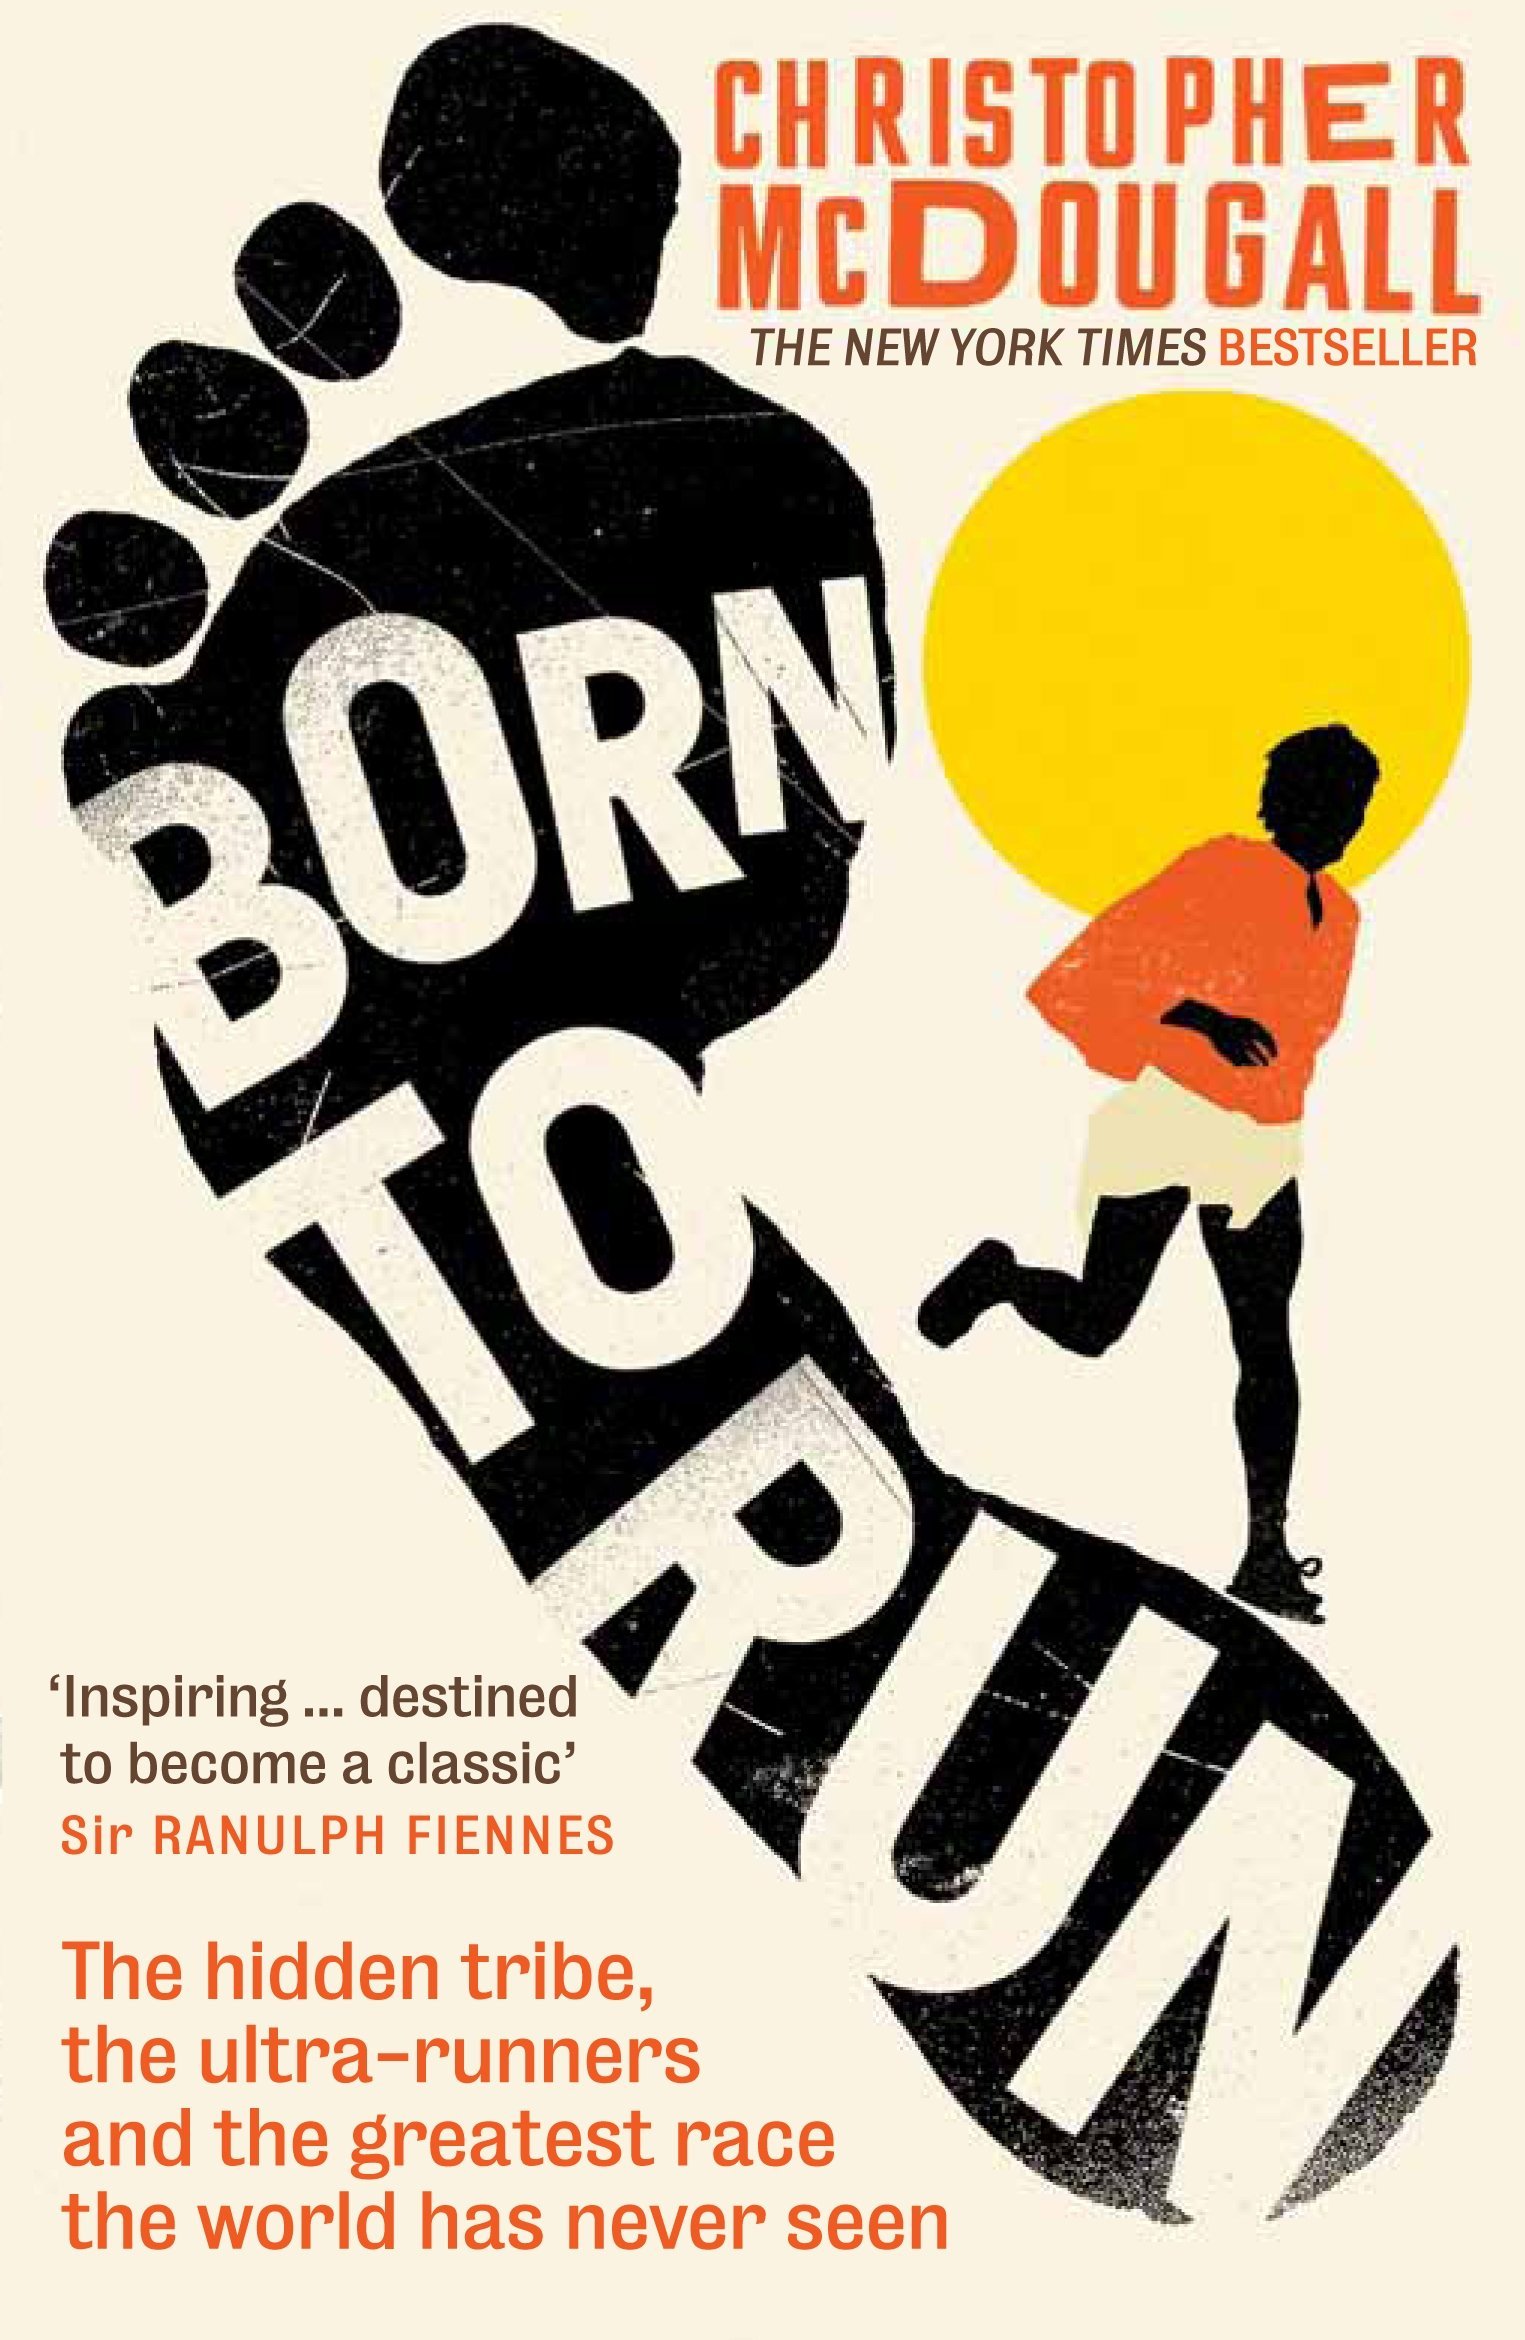 'Born to Run: The Hidden Tribe, the Ultra-Runners, and the Greatest Race the World Has Never Seen' by Christopher McDougall 